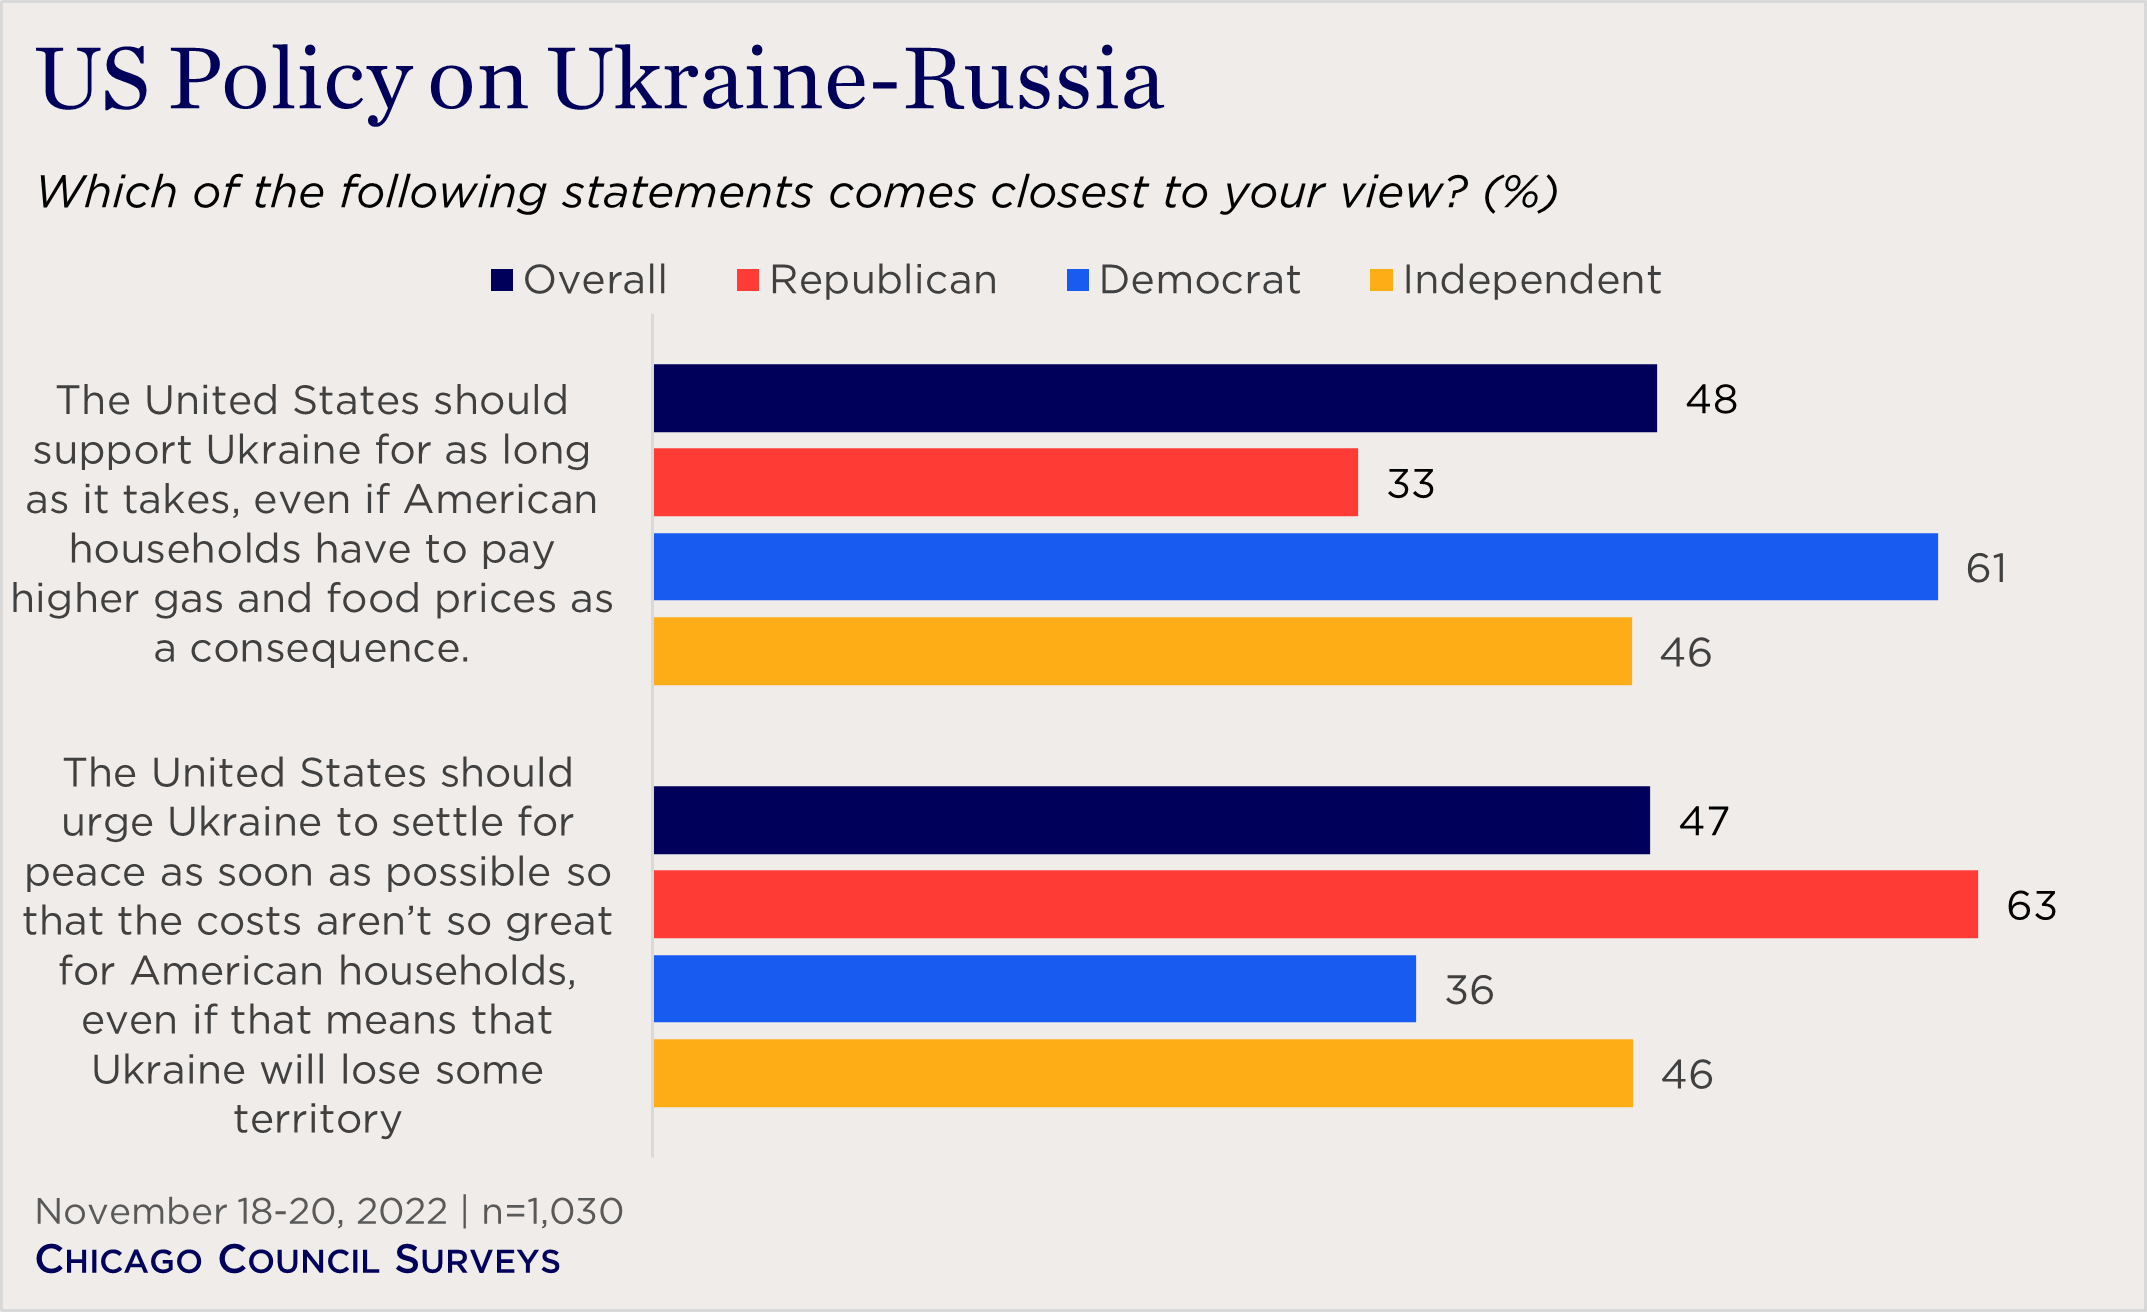 bar chart showing partisan views on US policy on Ukraine-Russia